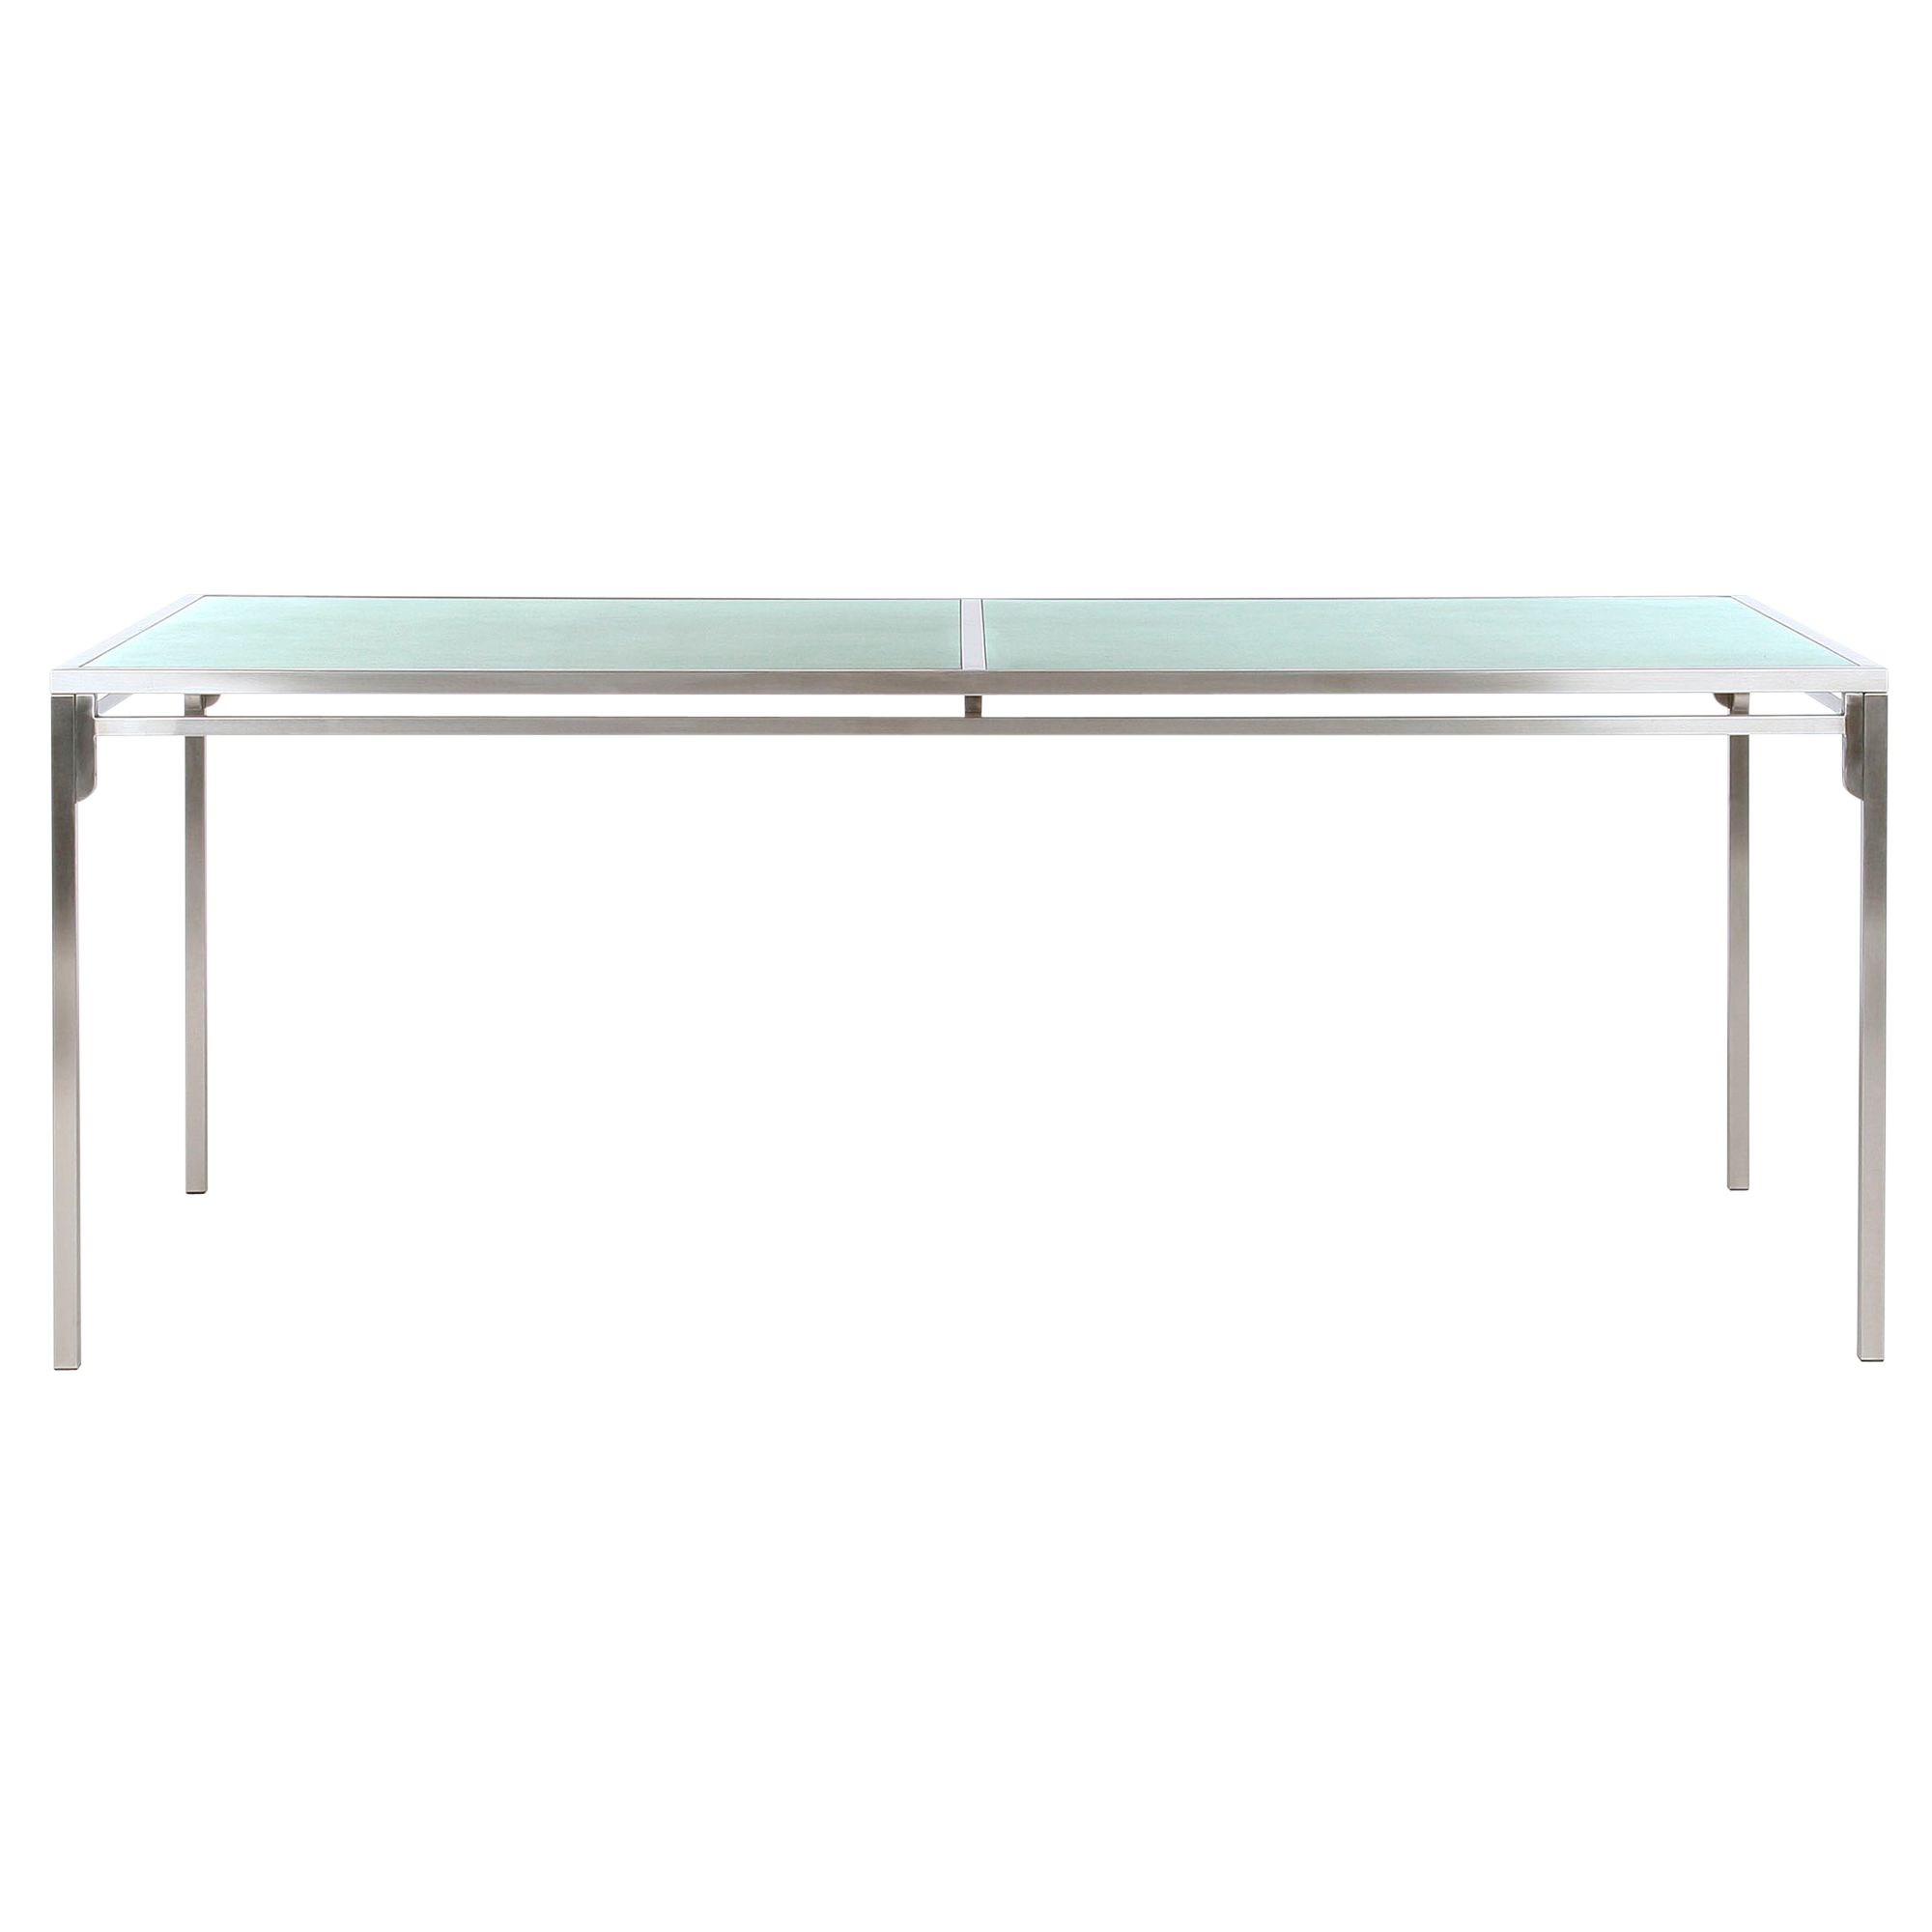 Barlow Tyrie Quattro Dining Table, Sea Ice